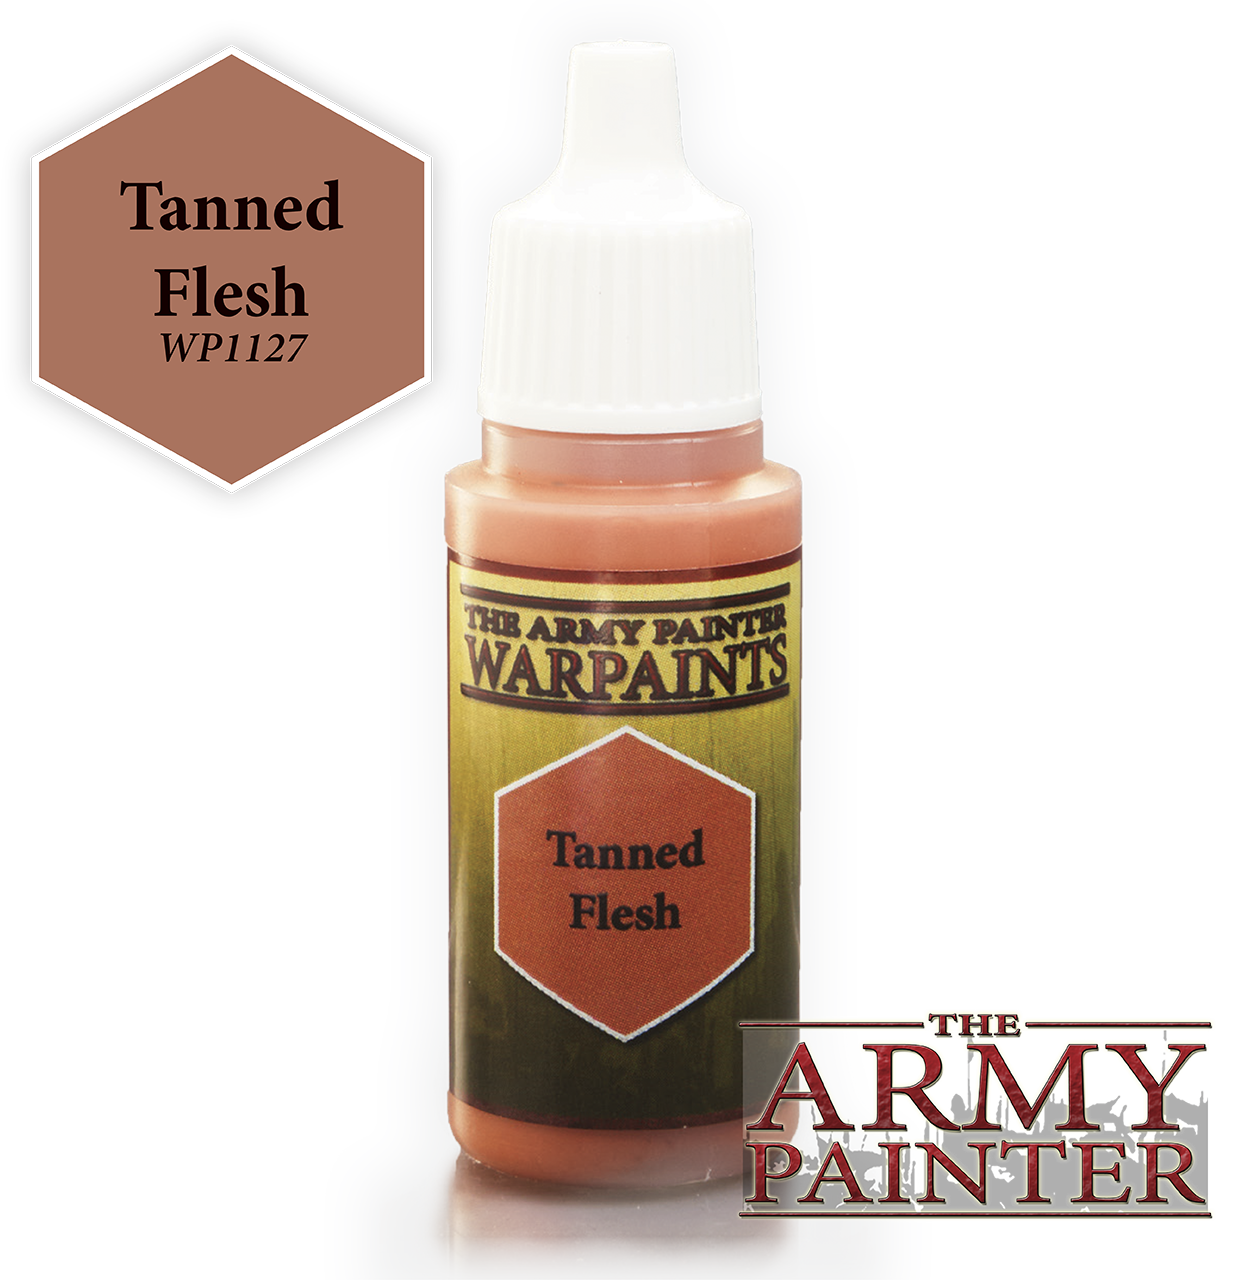 The ARMY PAINTER: Acrylics Warpaint - Tanned Flesh | Tacoma Games